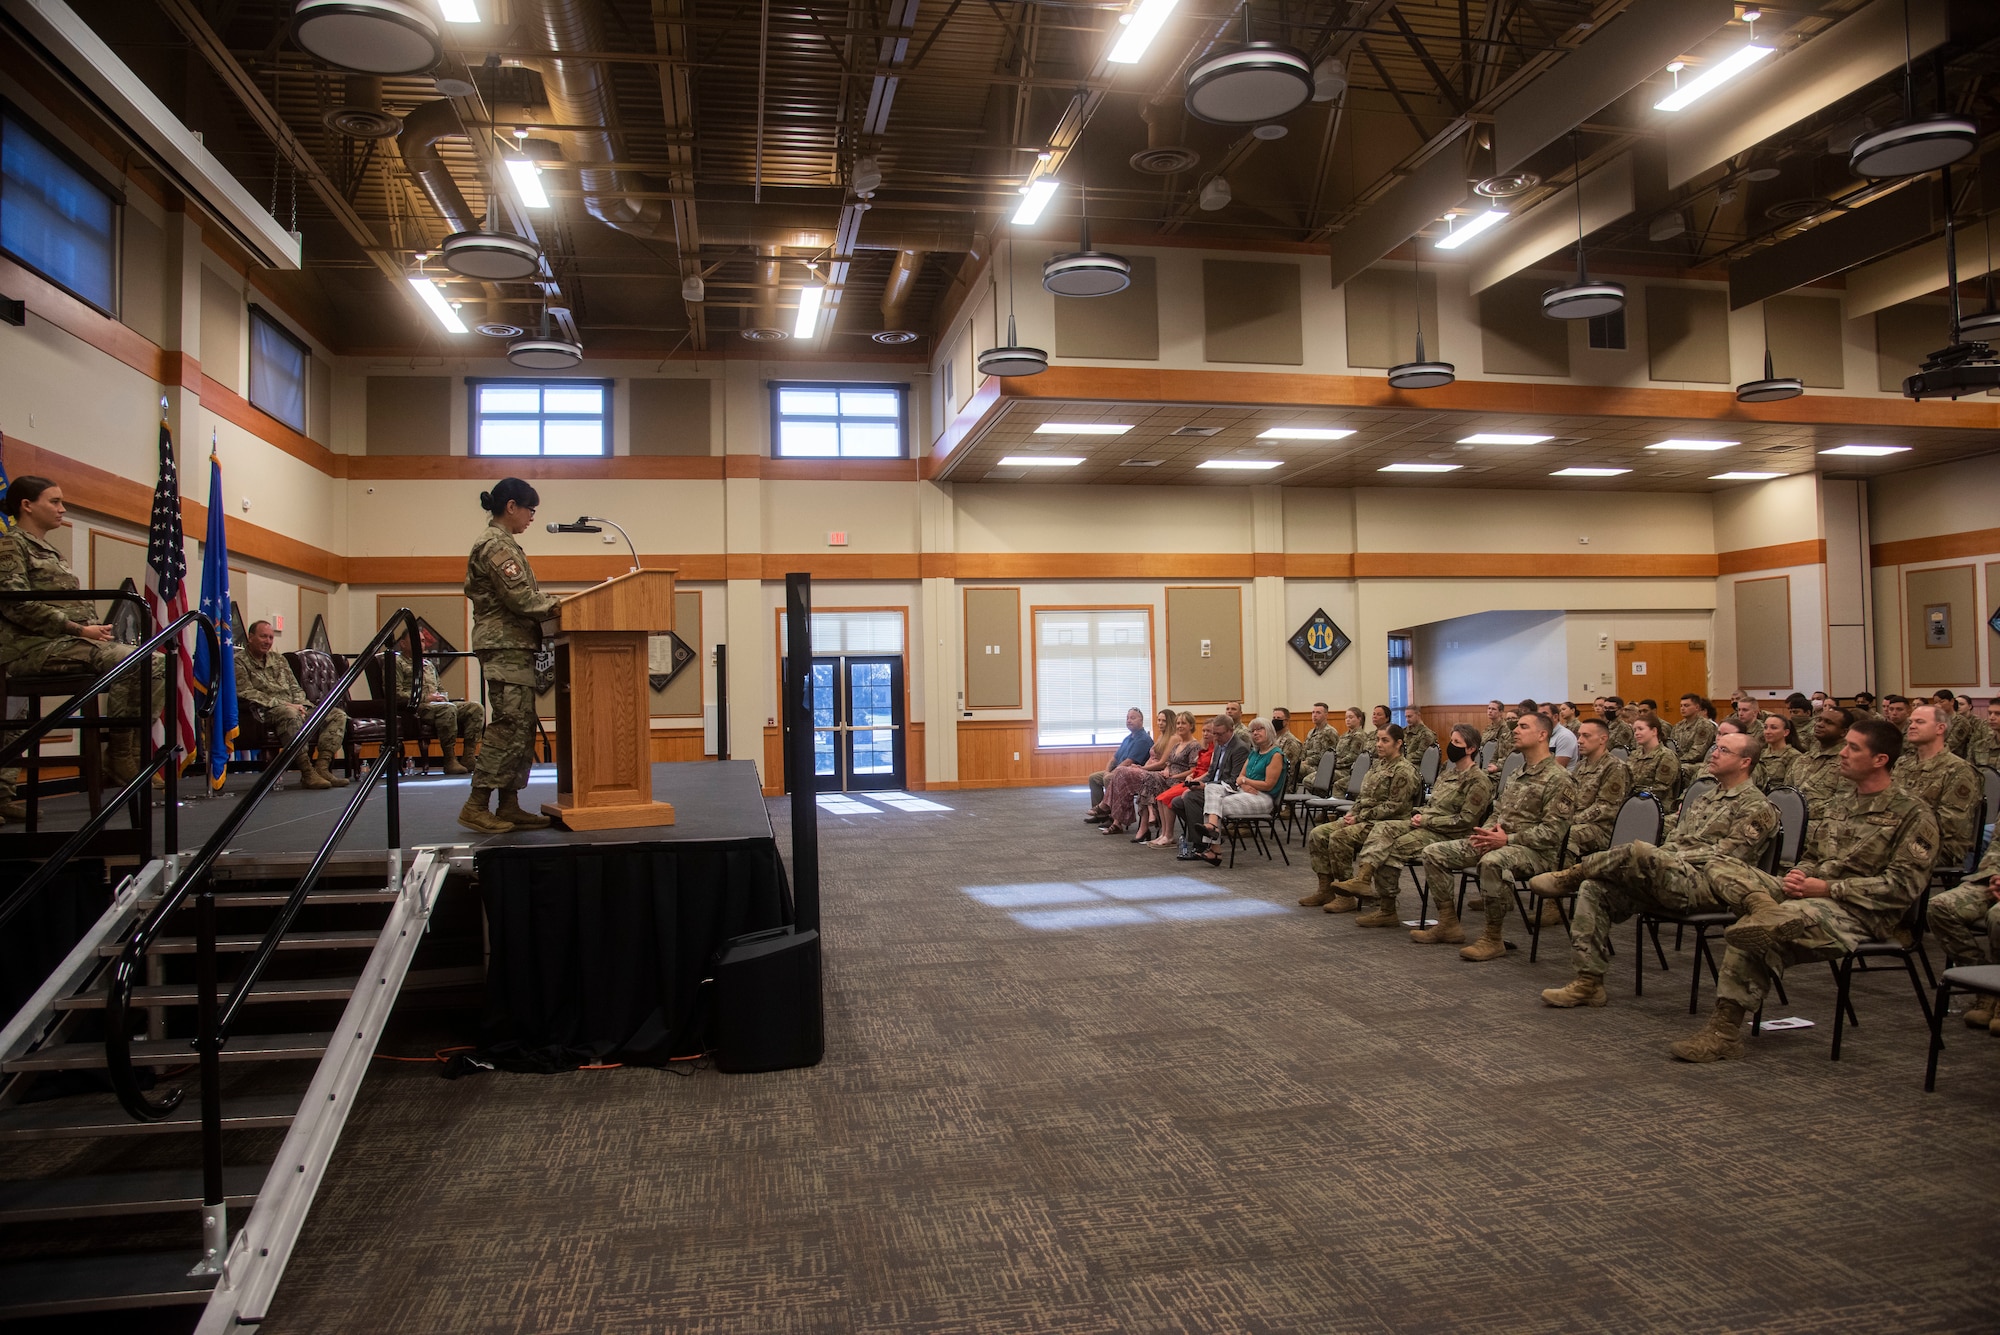 Lt. Col. Michelle Dimoff, 341st Operational Medical Readiness Squadron outgoing commander, addresses her squadron for the last time before relinquishing command during a change of command ceremony June 16, 2021 at Malmstrom Air Force Base, Mont.